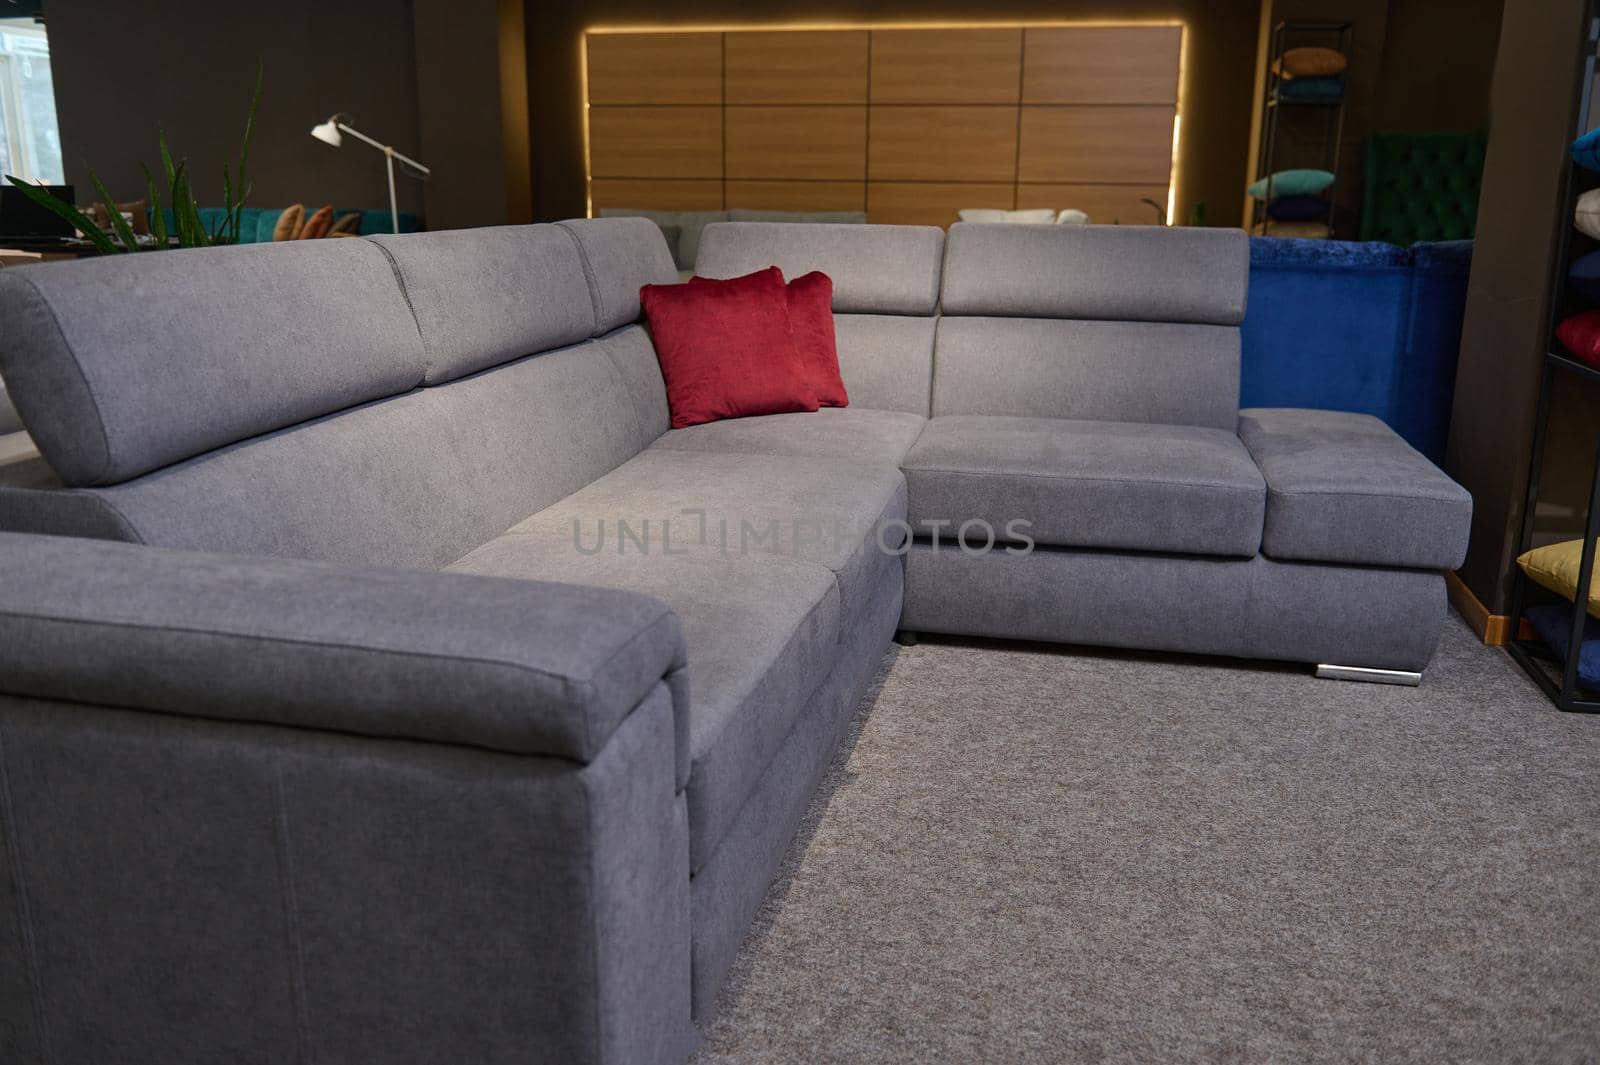 Upholstered furniture on display for sale in the showroom of furniture store. Modern stylish sofas, couches and settees with bright colored cushions from high quality fabrics in the exhibition hall. by artgf